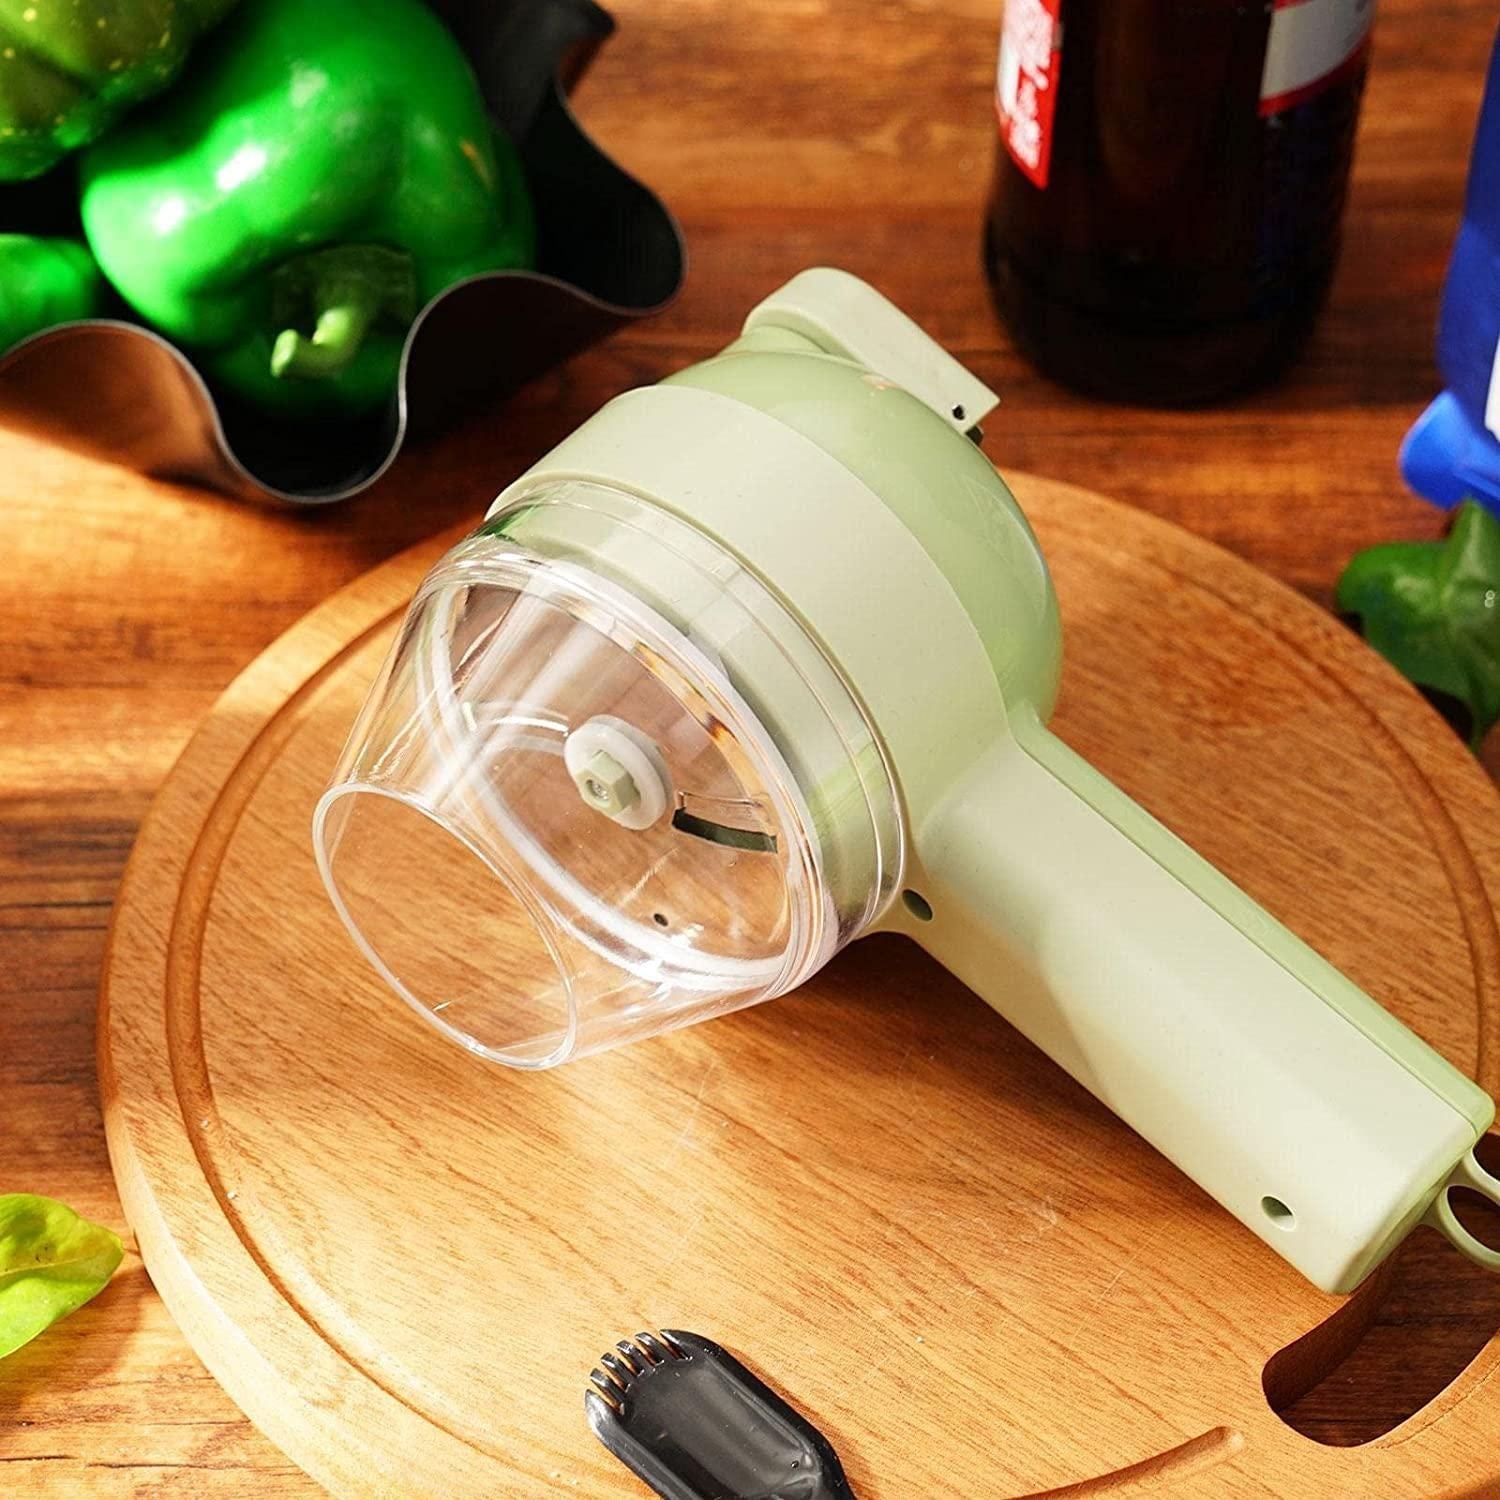 4 in 1 Portable Electric Vegetable Cutter Set – minibuypro